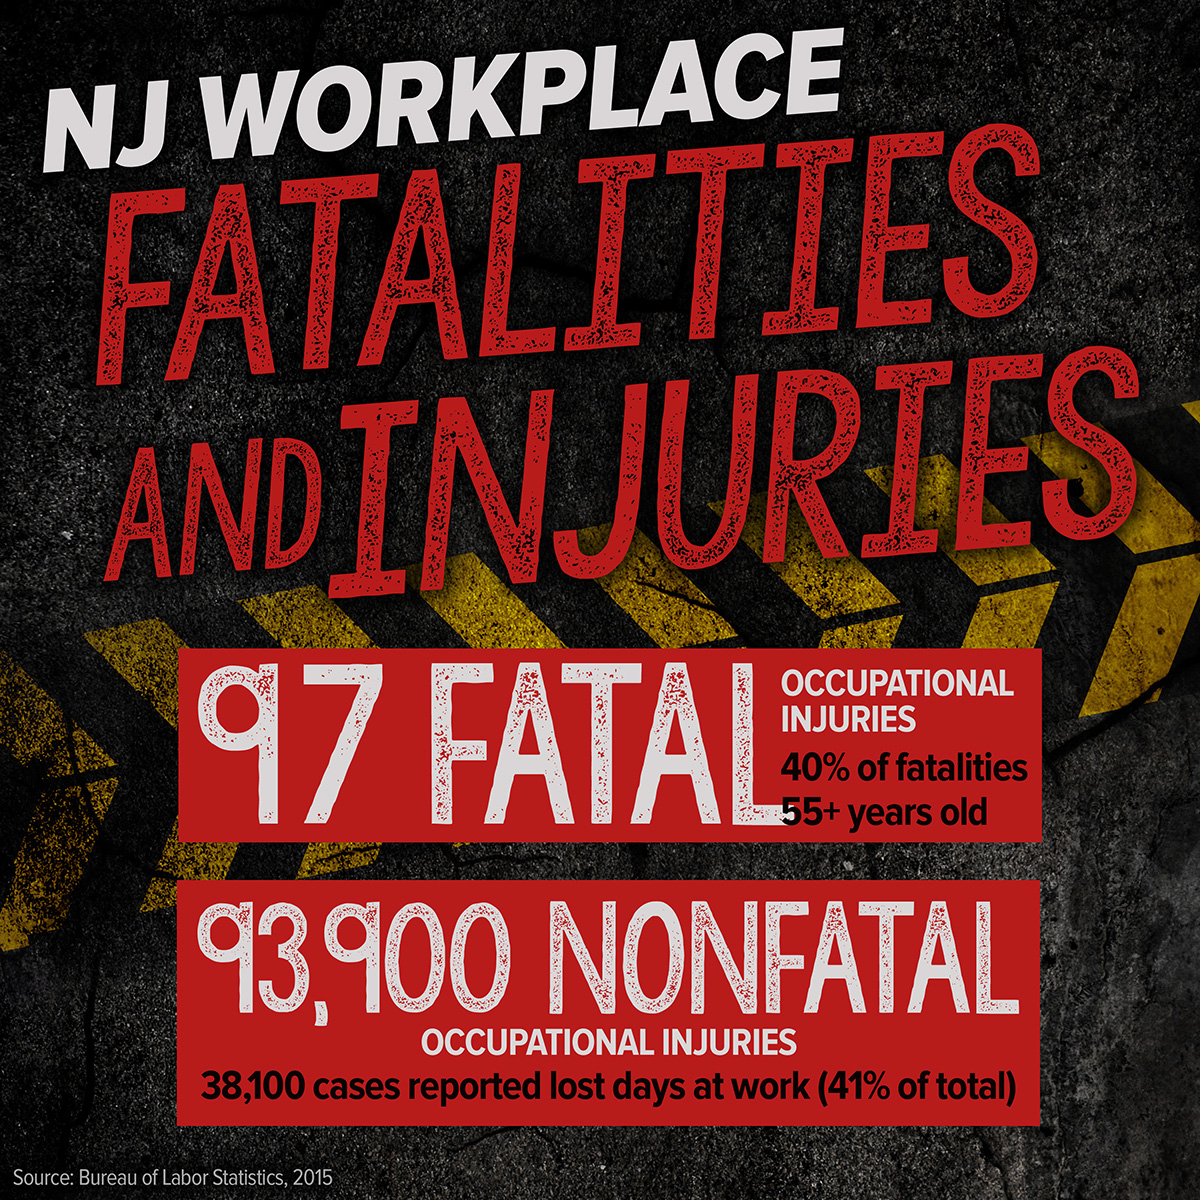 NJ Workplace Fatalities and Injuries